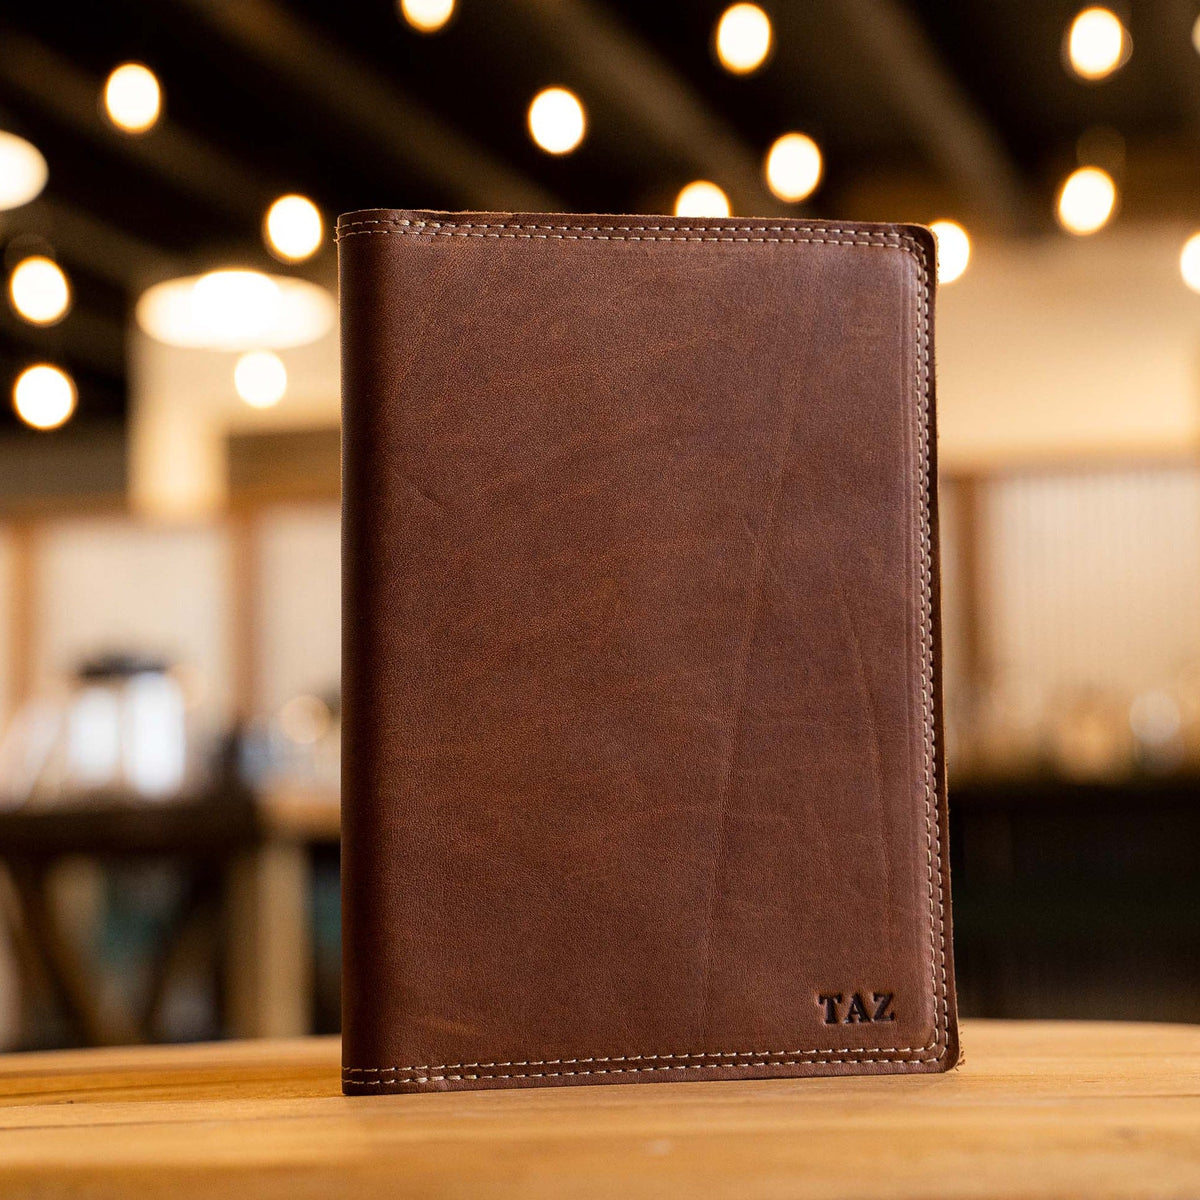 Full-grain leather cowhide journal with initials